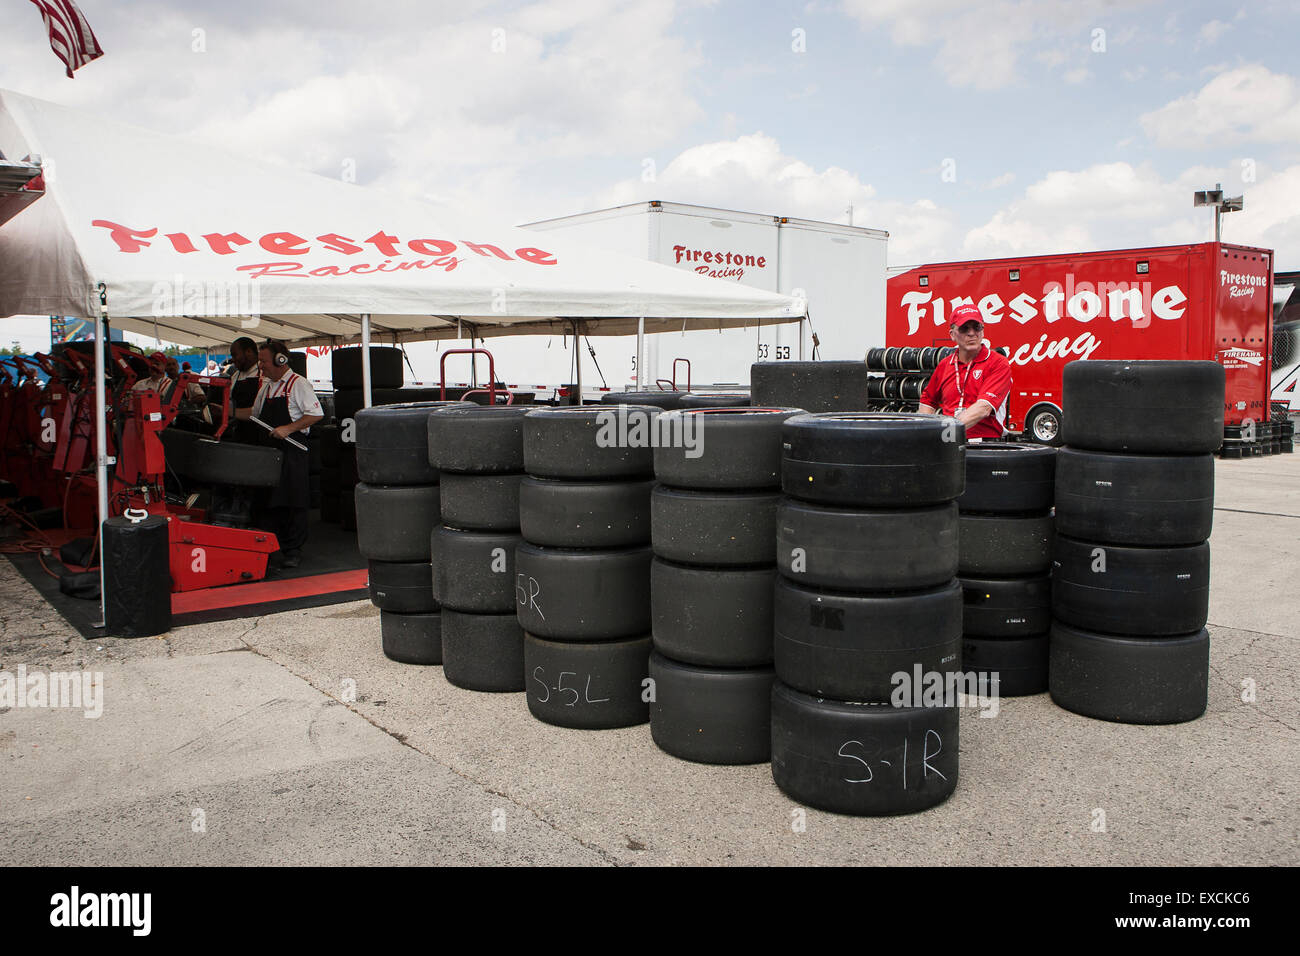 Stacks of used race car tires at an IndyCar race. Stock Photo